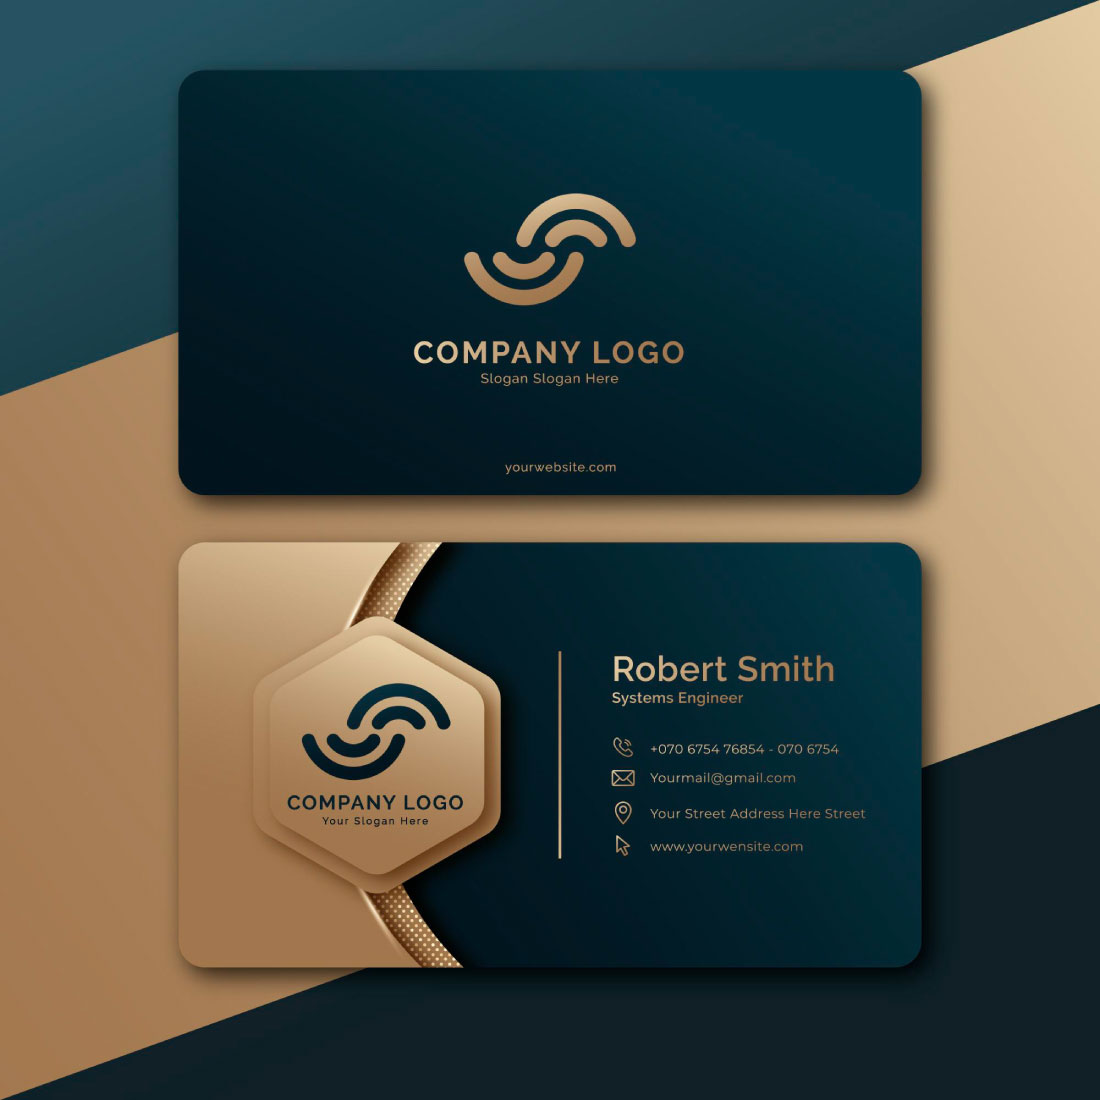 Stylish Business Card Template Design cover image.